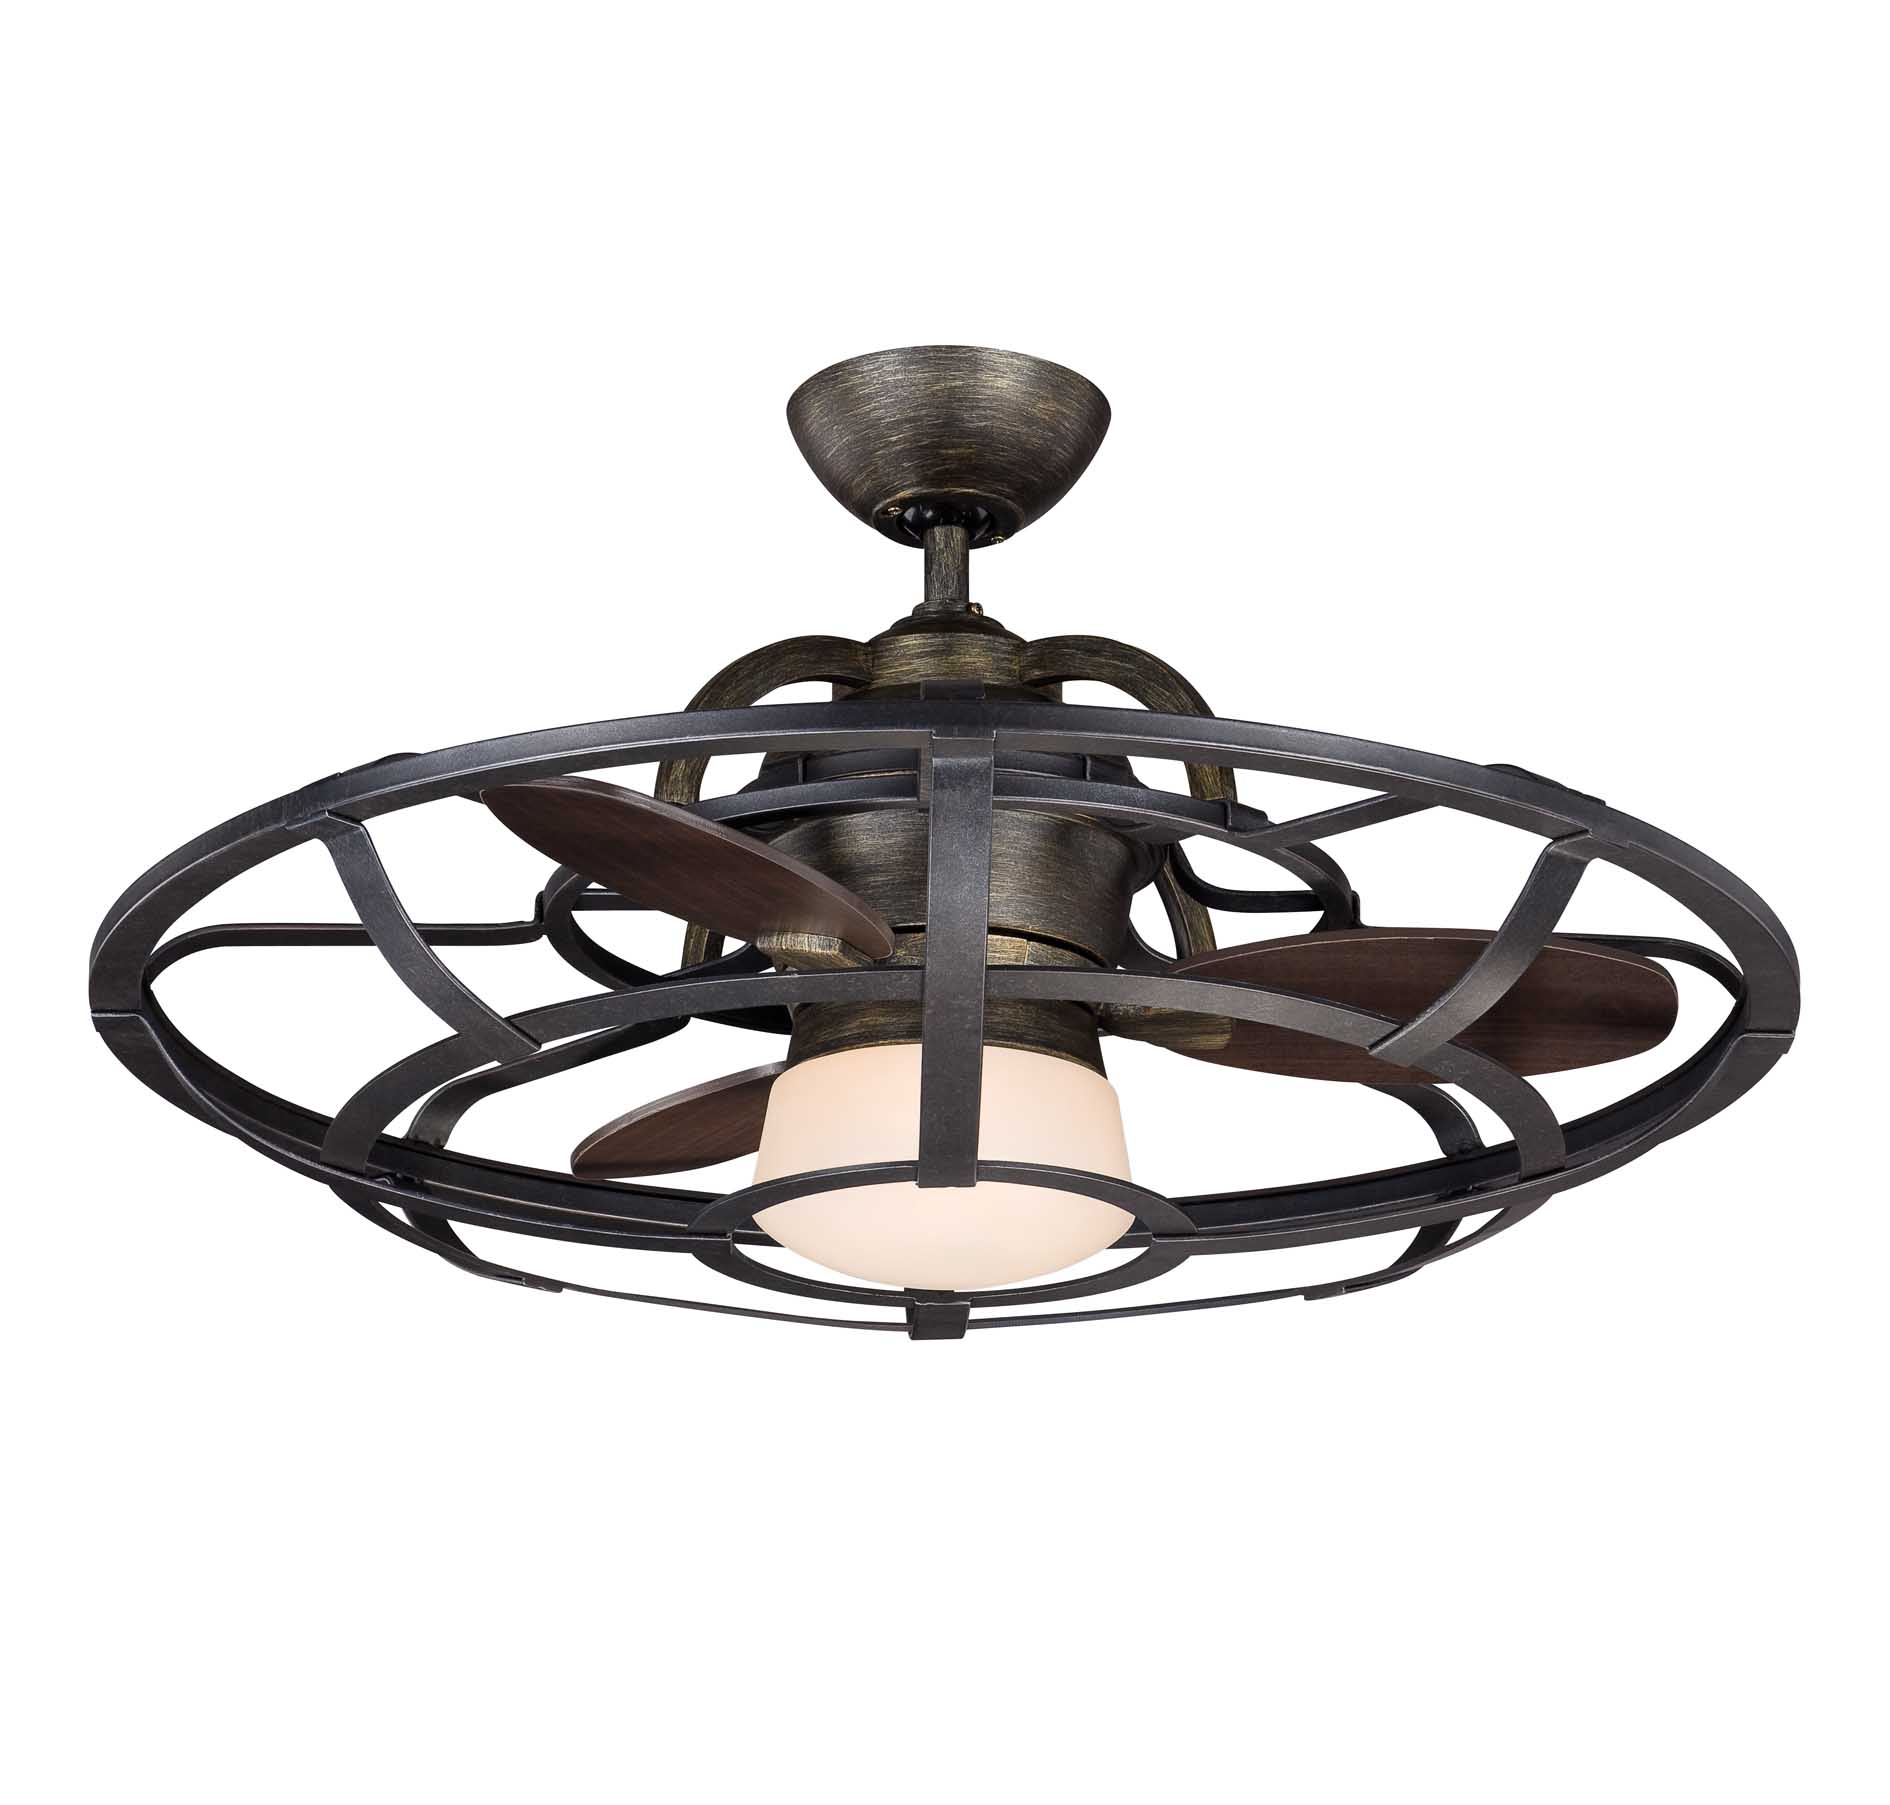 10 adventiges of Wrought iron ceiling fans | Warisan Lighting